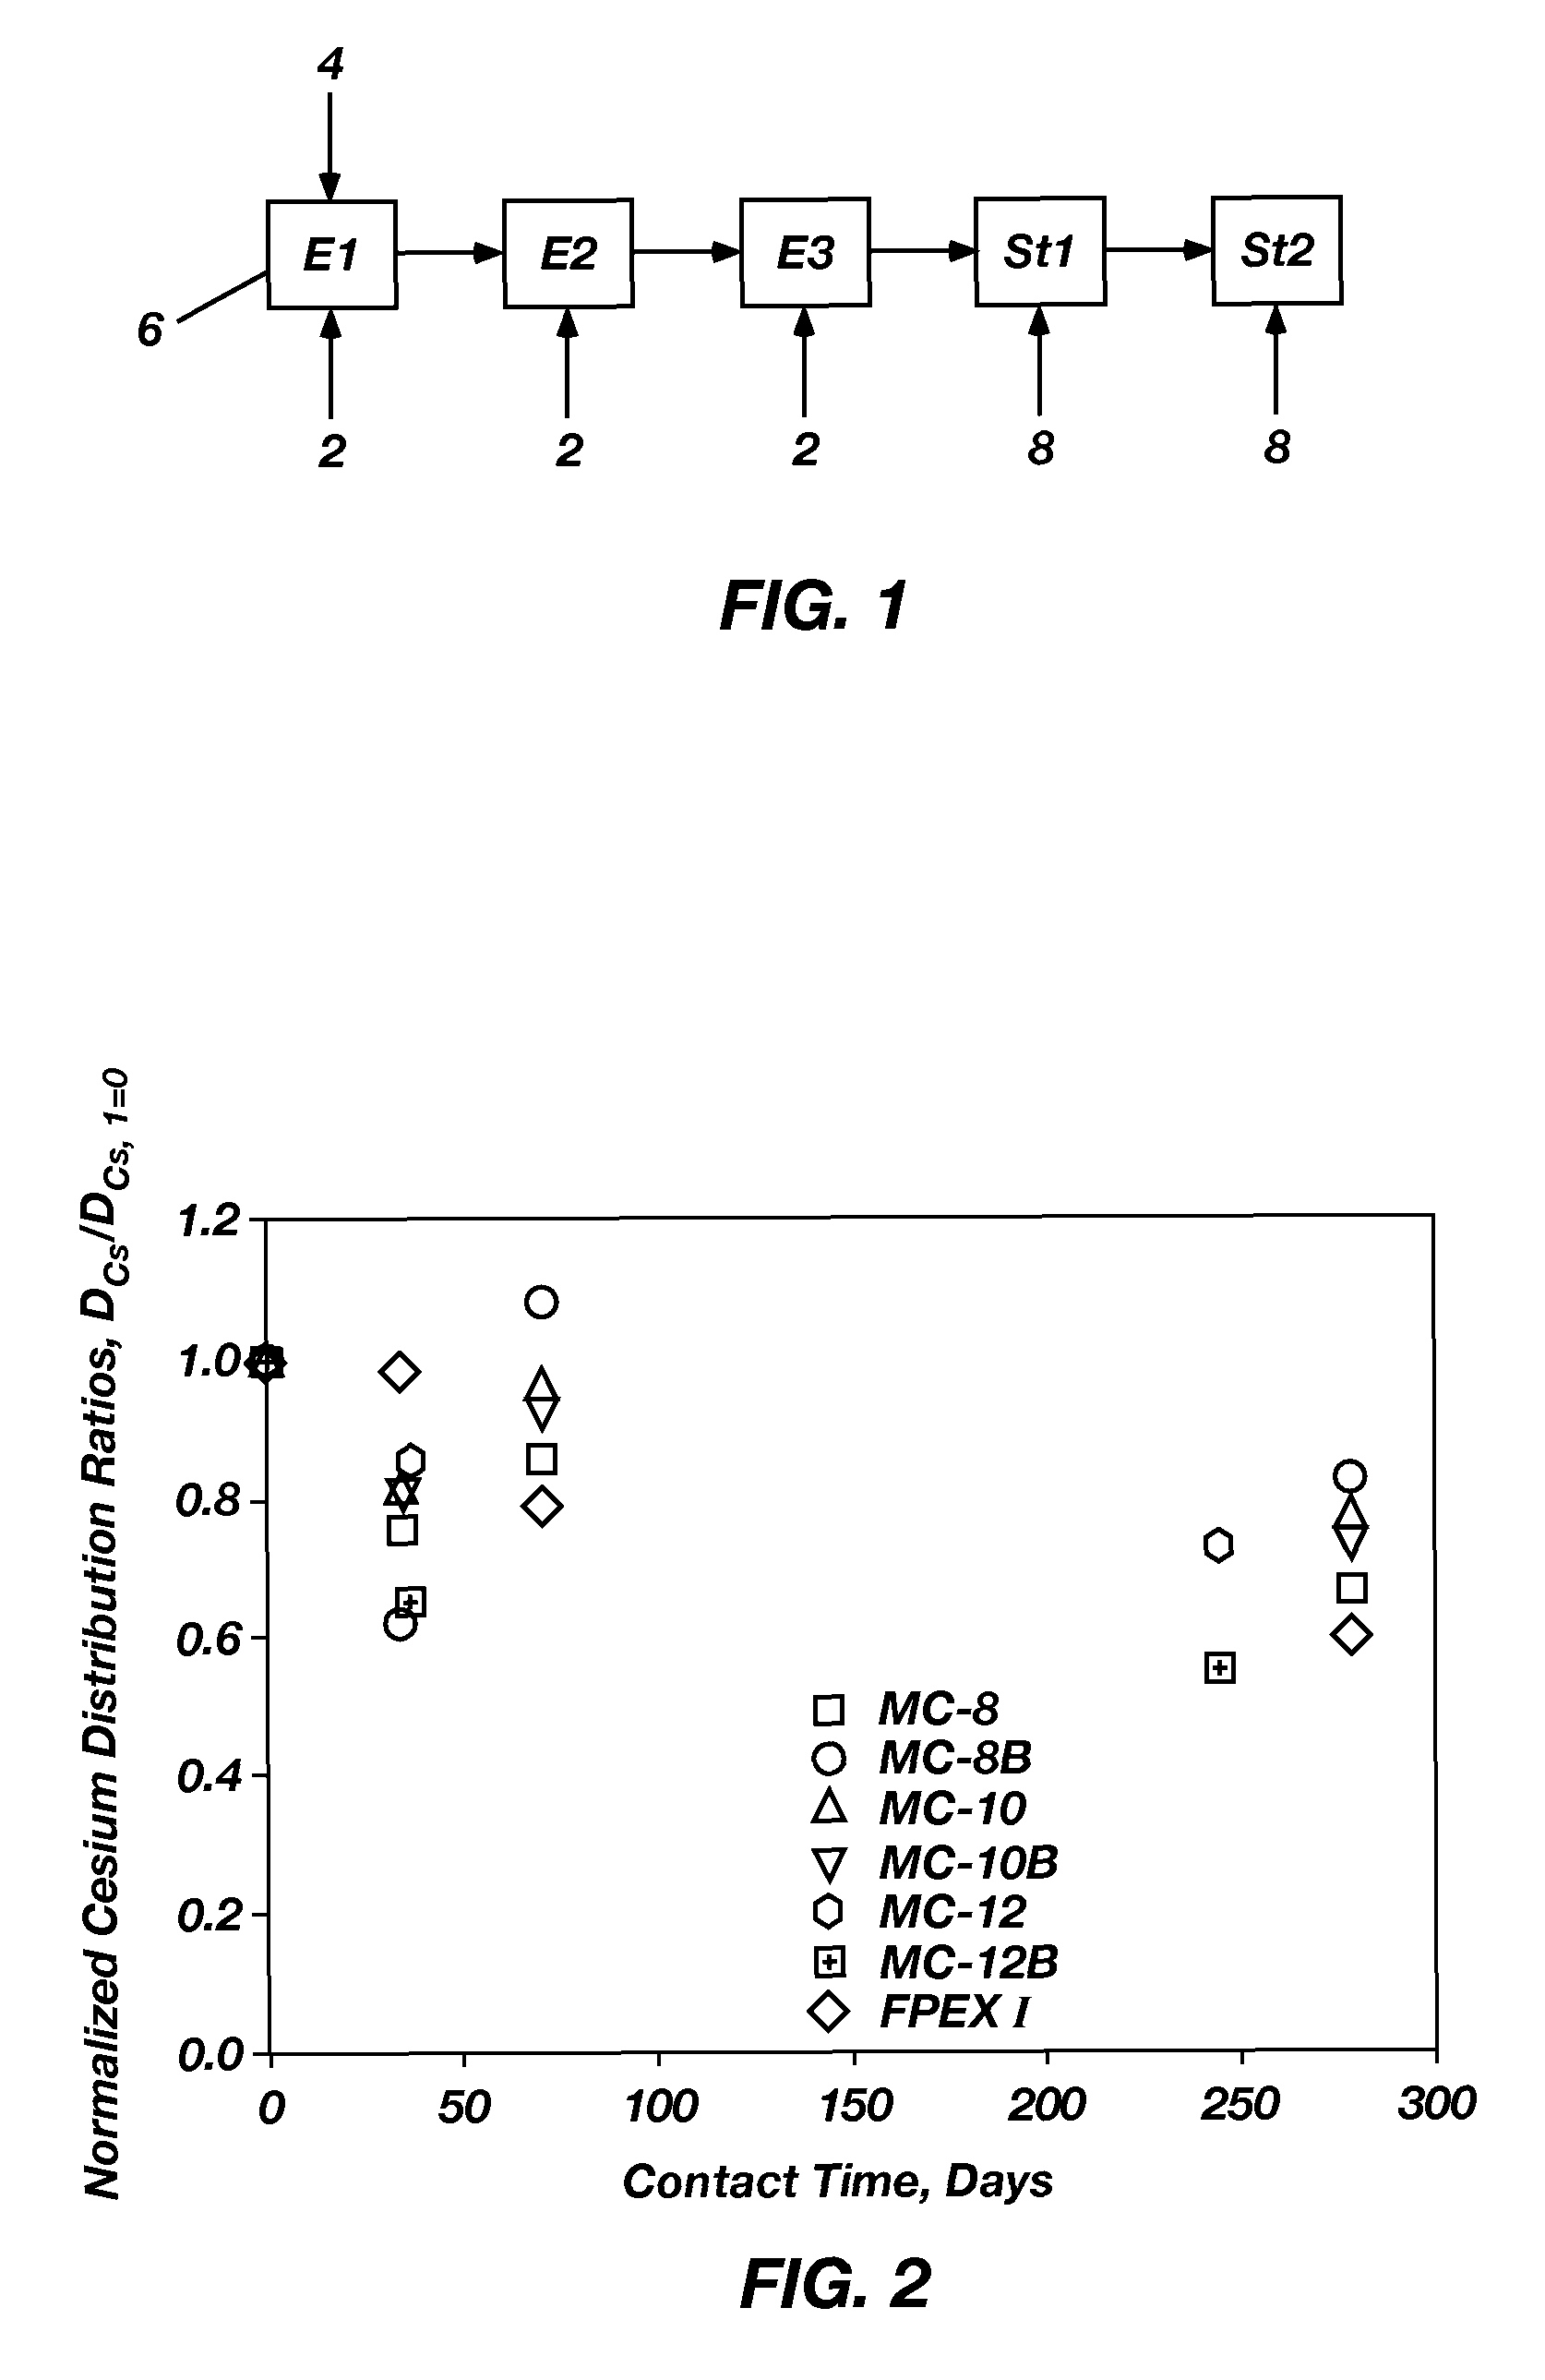 Extractant compositions for co-extracting cesium and strontium, a method of separating cesium and strontium from an aqueous feed, and calixarene compounds